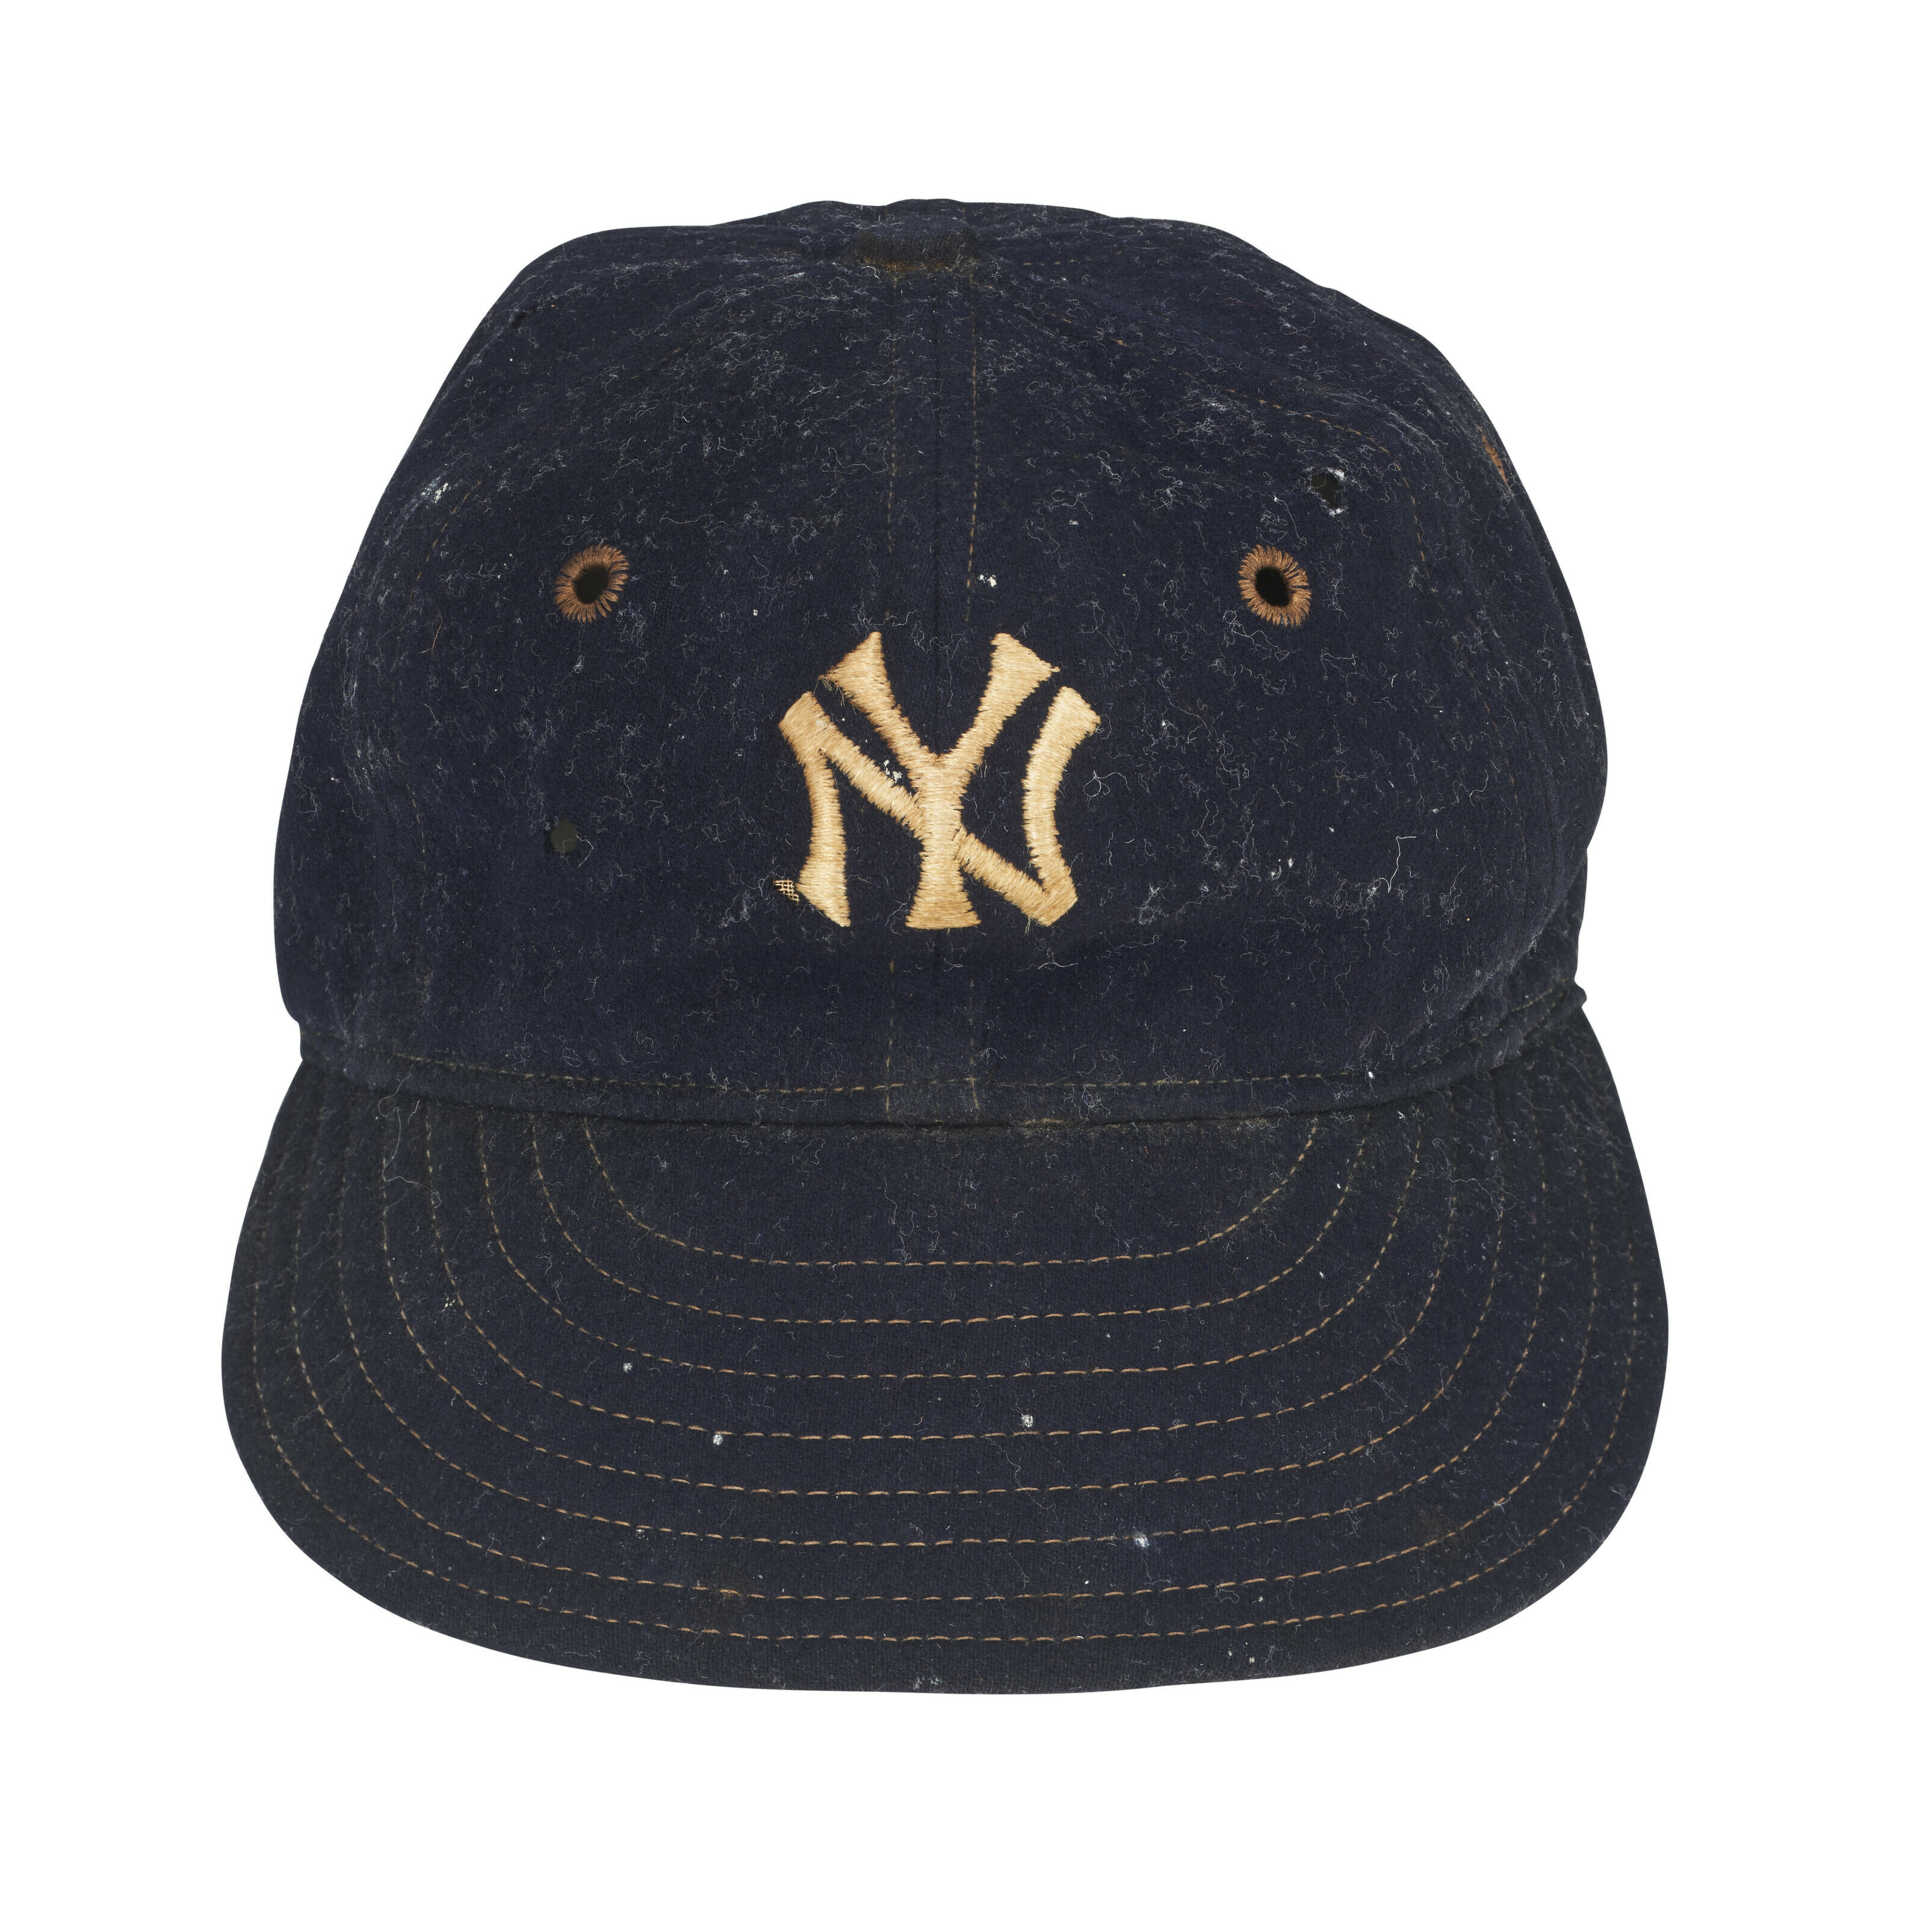 RARE LOU GEHRIG NEW YORK YANKEES PROFESSIONAL MODEL BASEBALL HAT C.1930S (DAVE GROB:MEARS AUTHENTICATION)(ACTOR EARL BENHAM PROVENANCE)